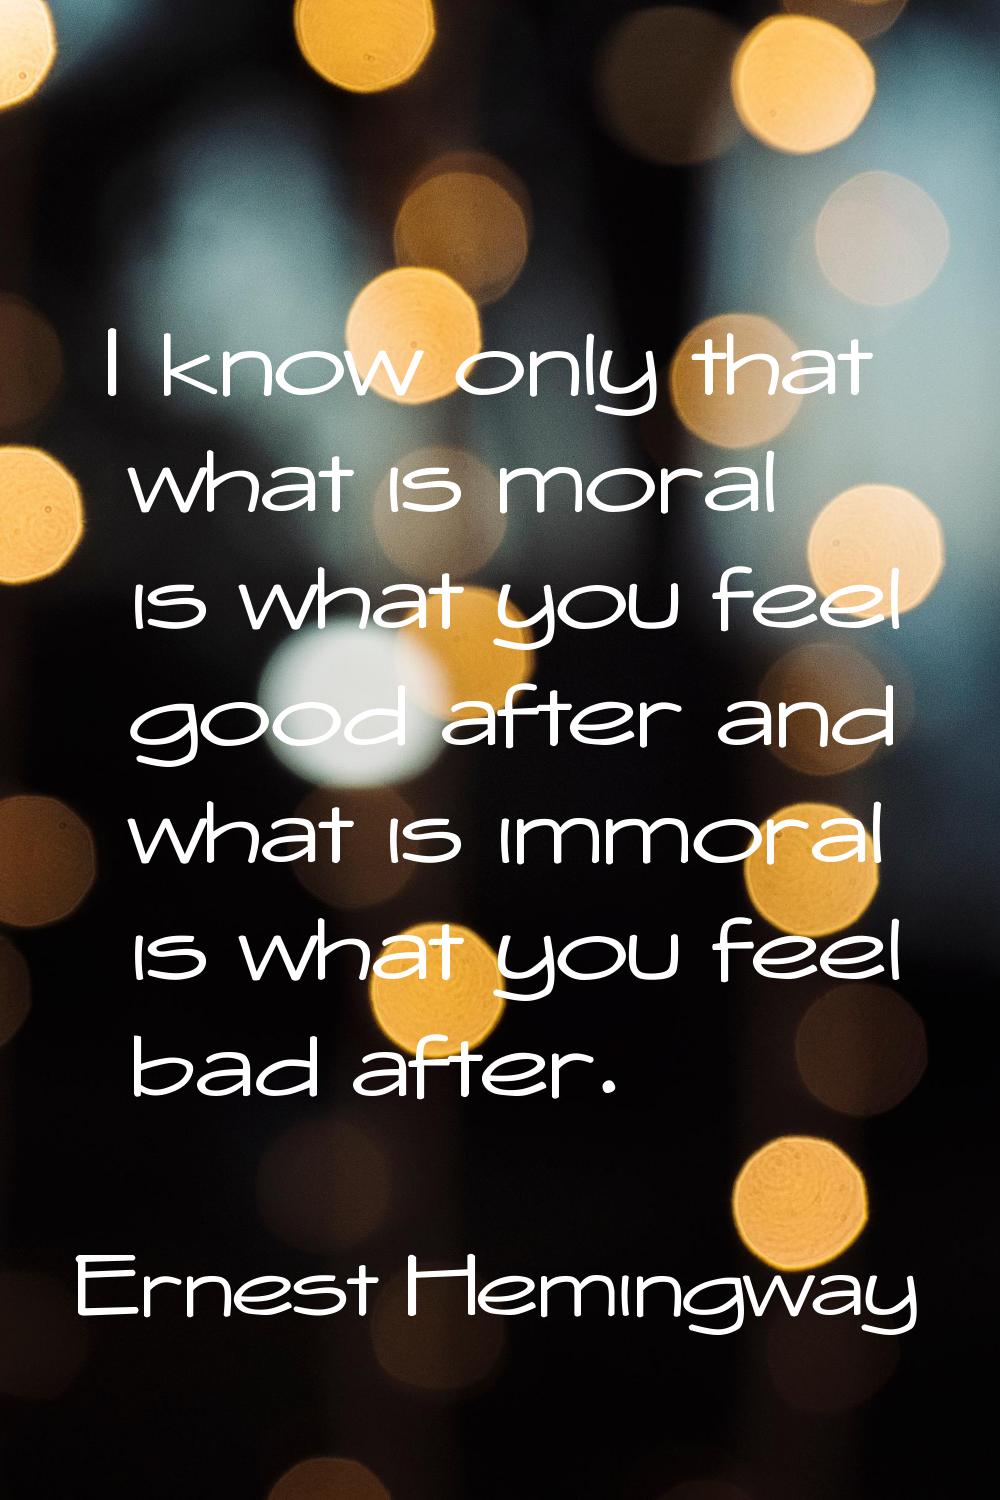 I know only that what is moral is what you feel good after and what is immoral is what you feel bad